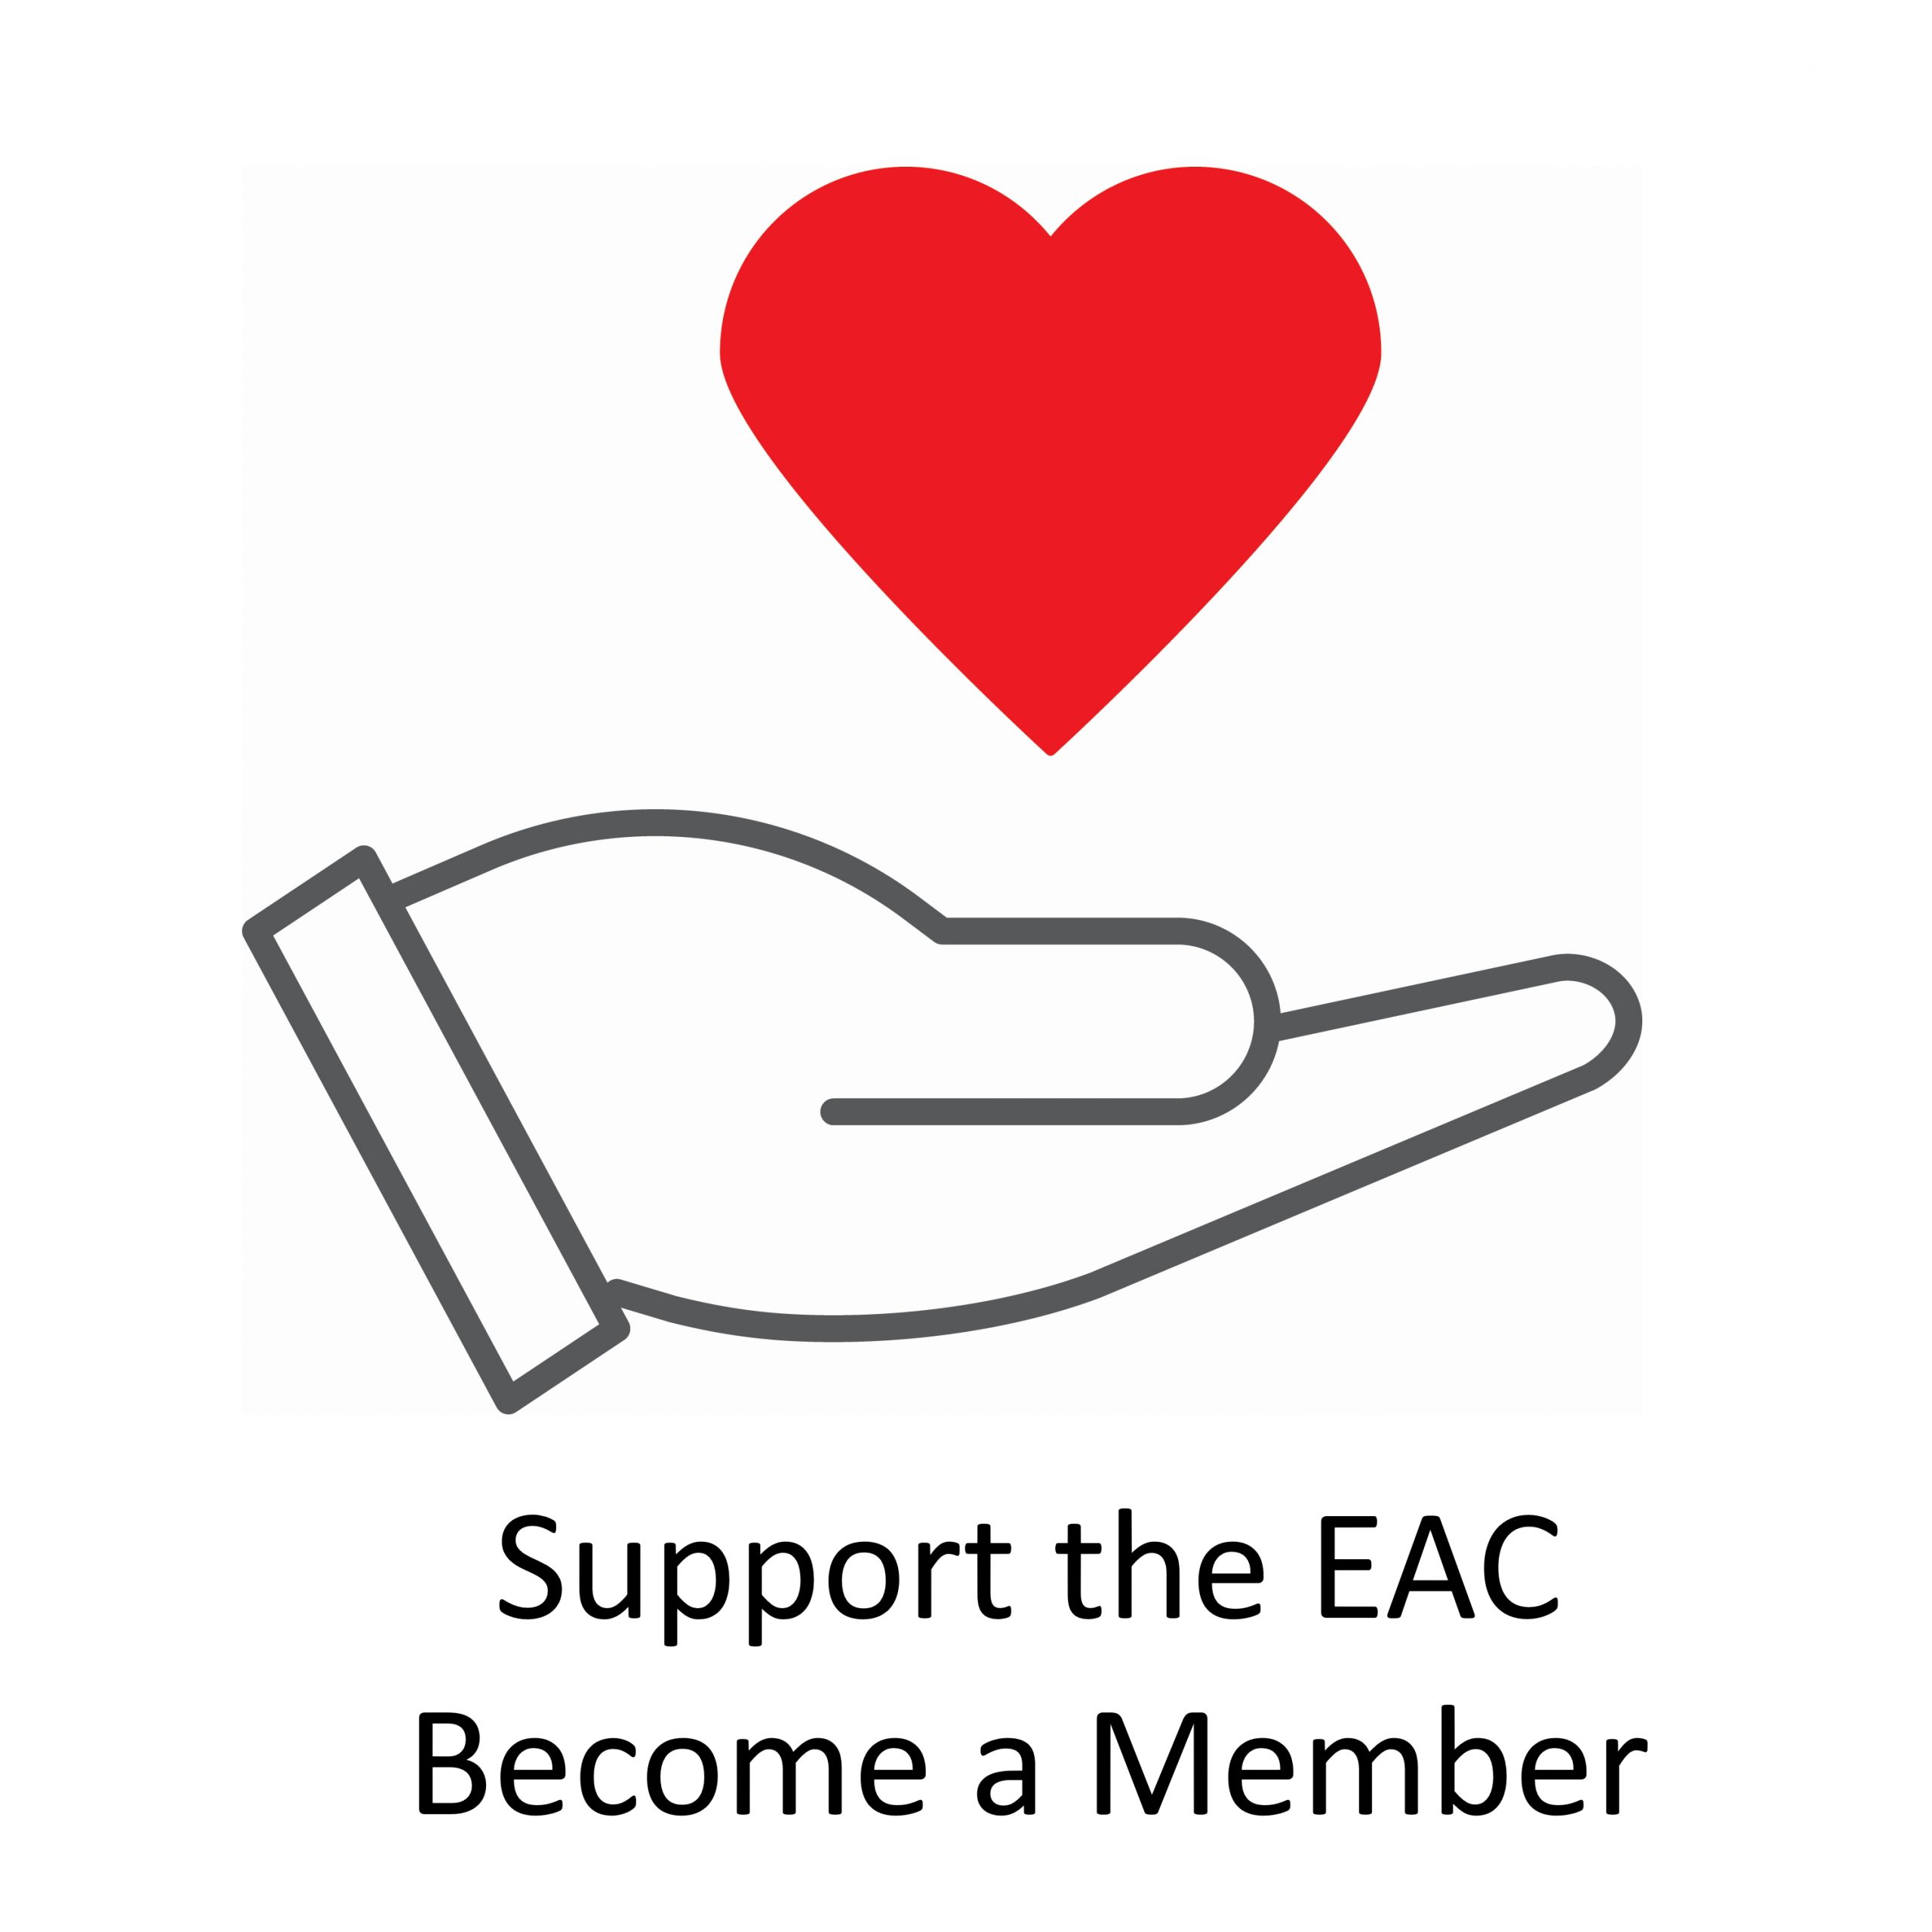 Support the EAC. Become a Member